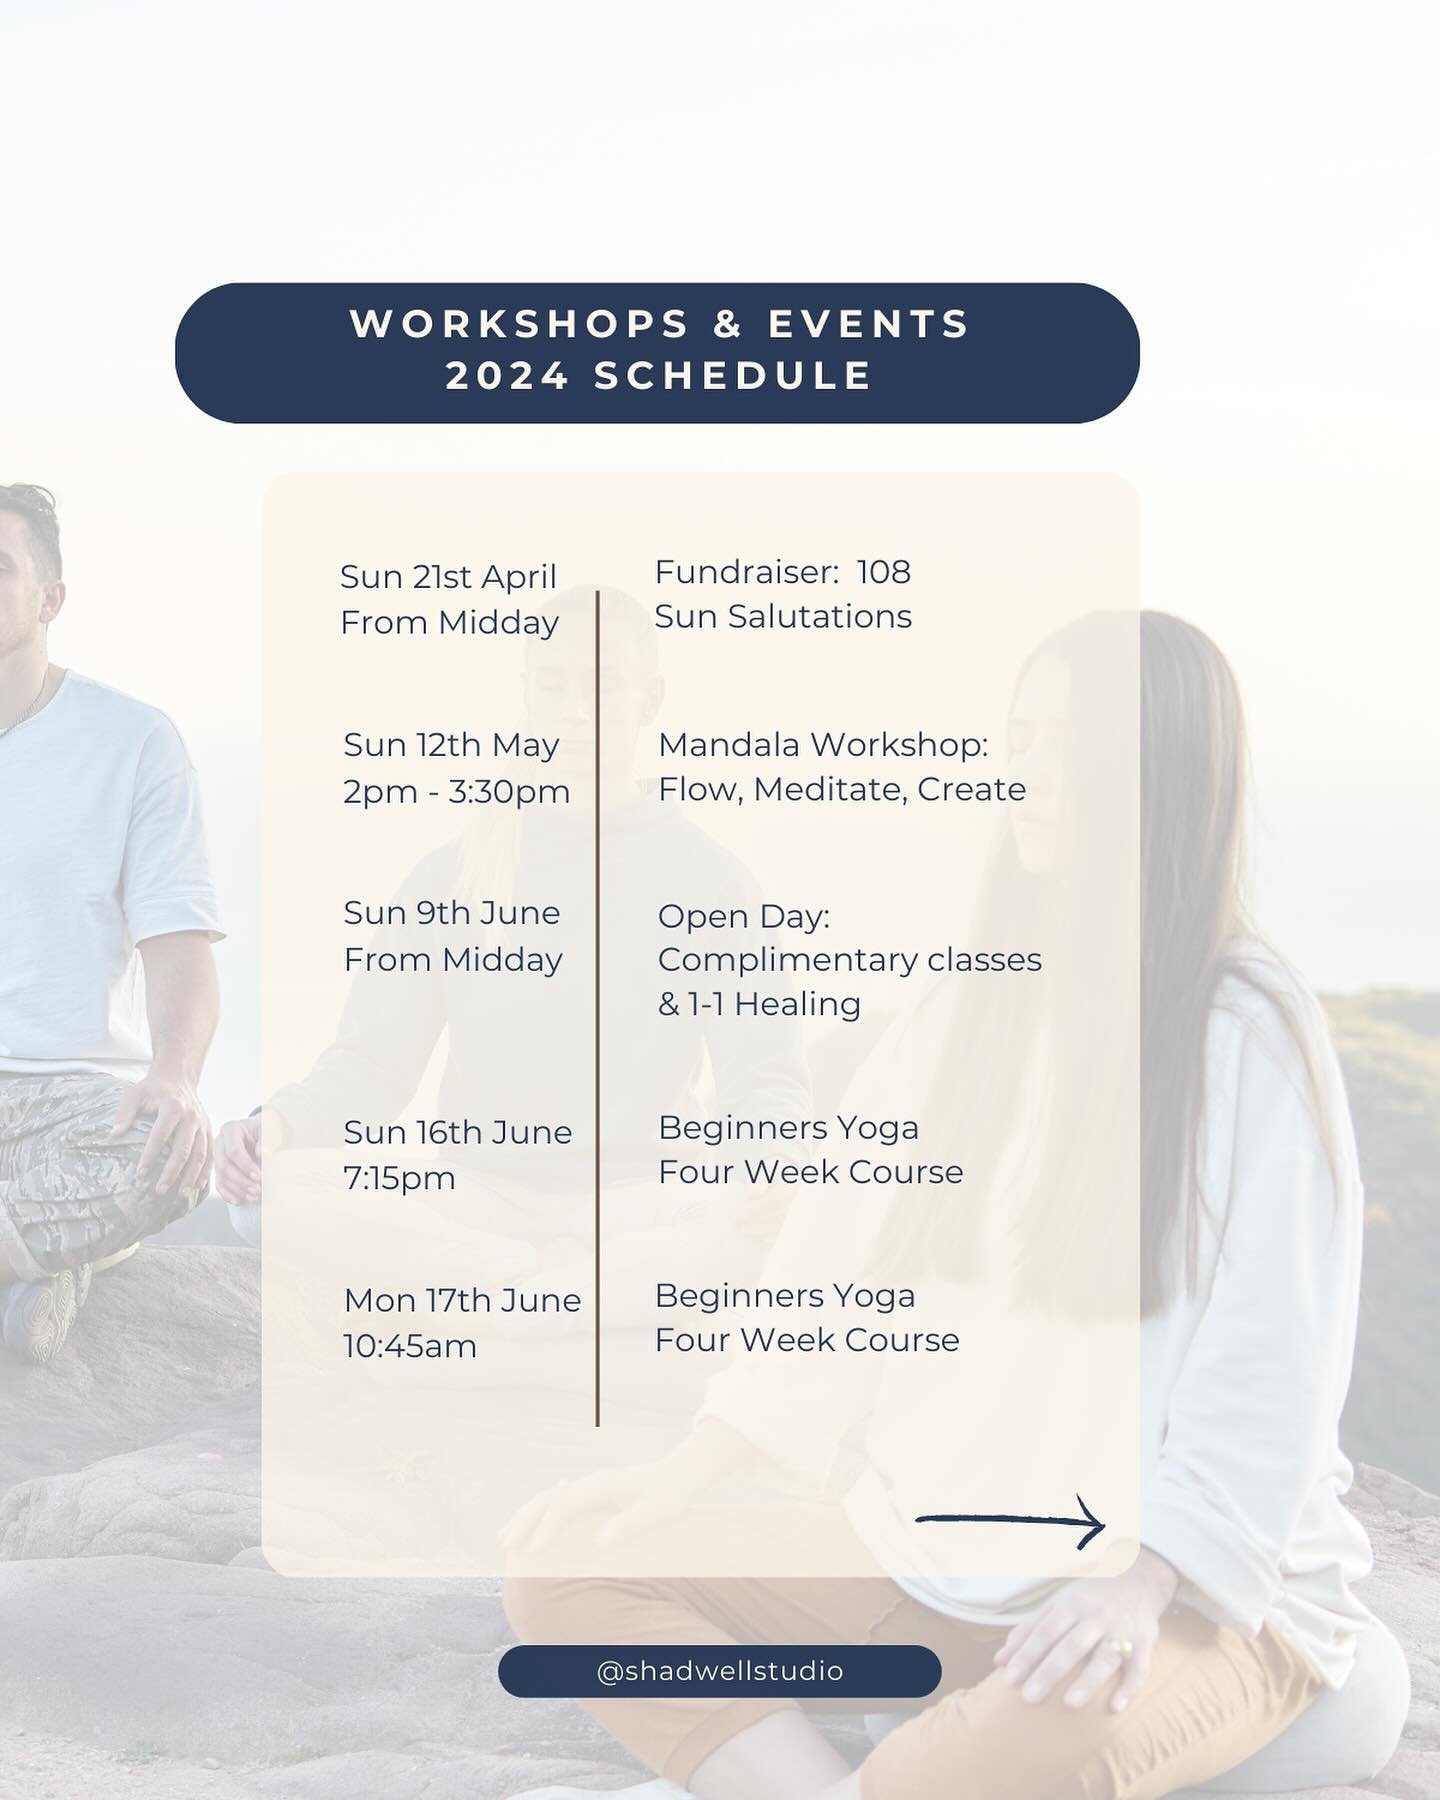 Summer Solstice Retreats ~ Mandala Yoga &amp; Mandala Creative Workshops ~ Fundraisers ~ Beginners Yoga Courses &amp; Open Days. 

Excited to be sharing lots of events this year with you alongside all the classes on a schedule. 

We hope to see you s